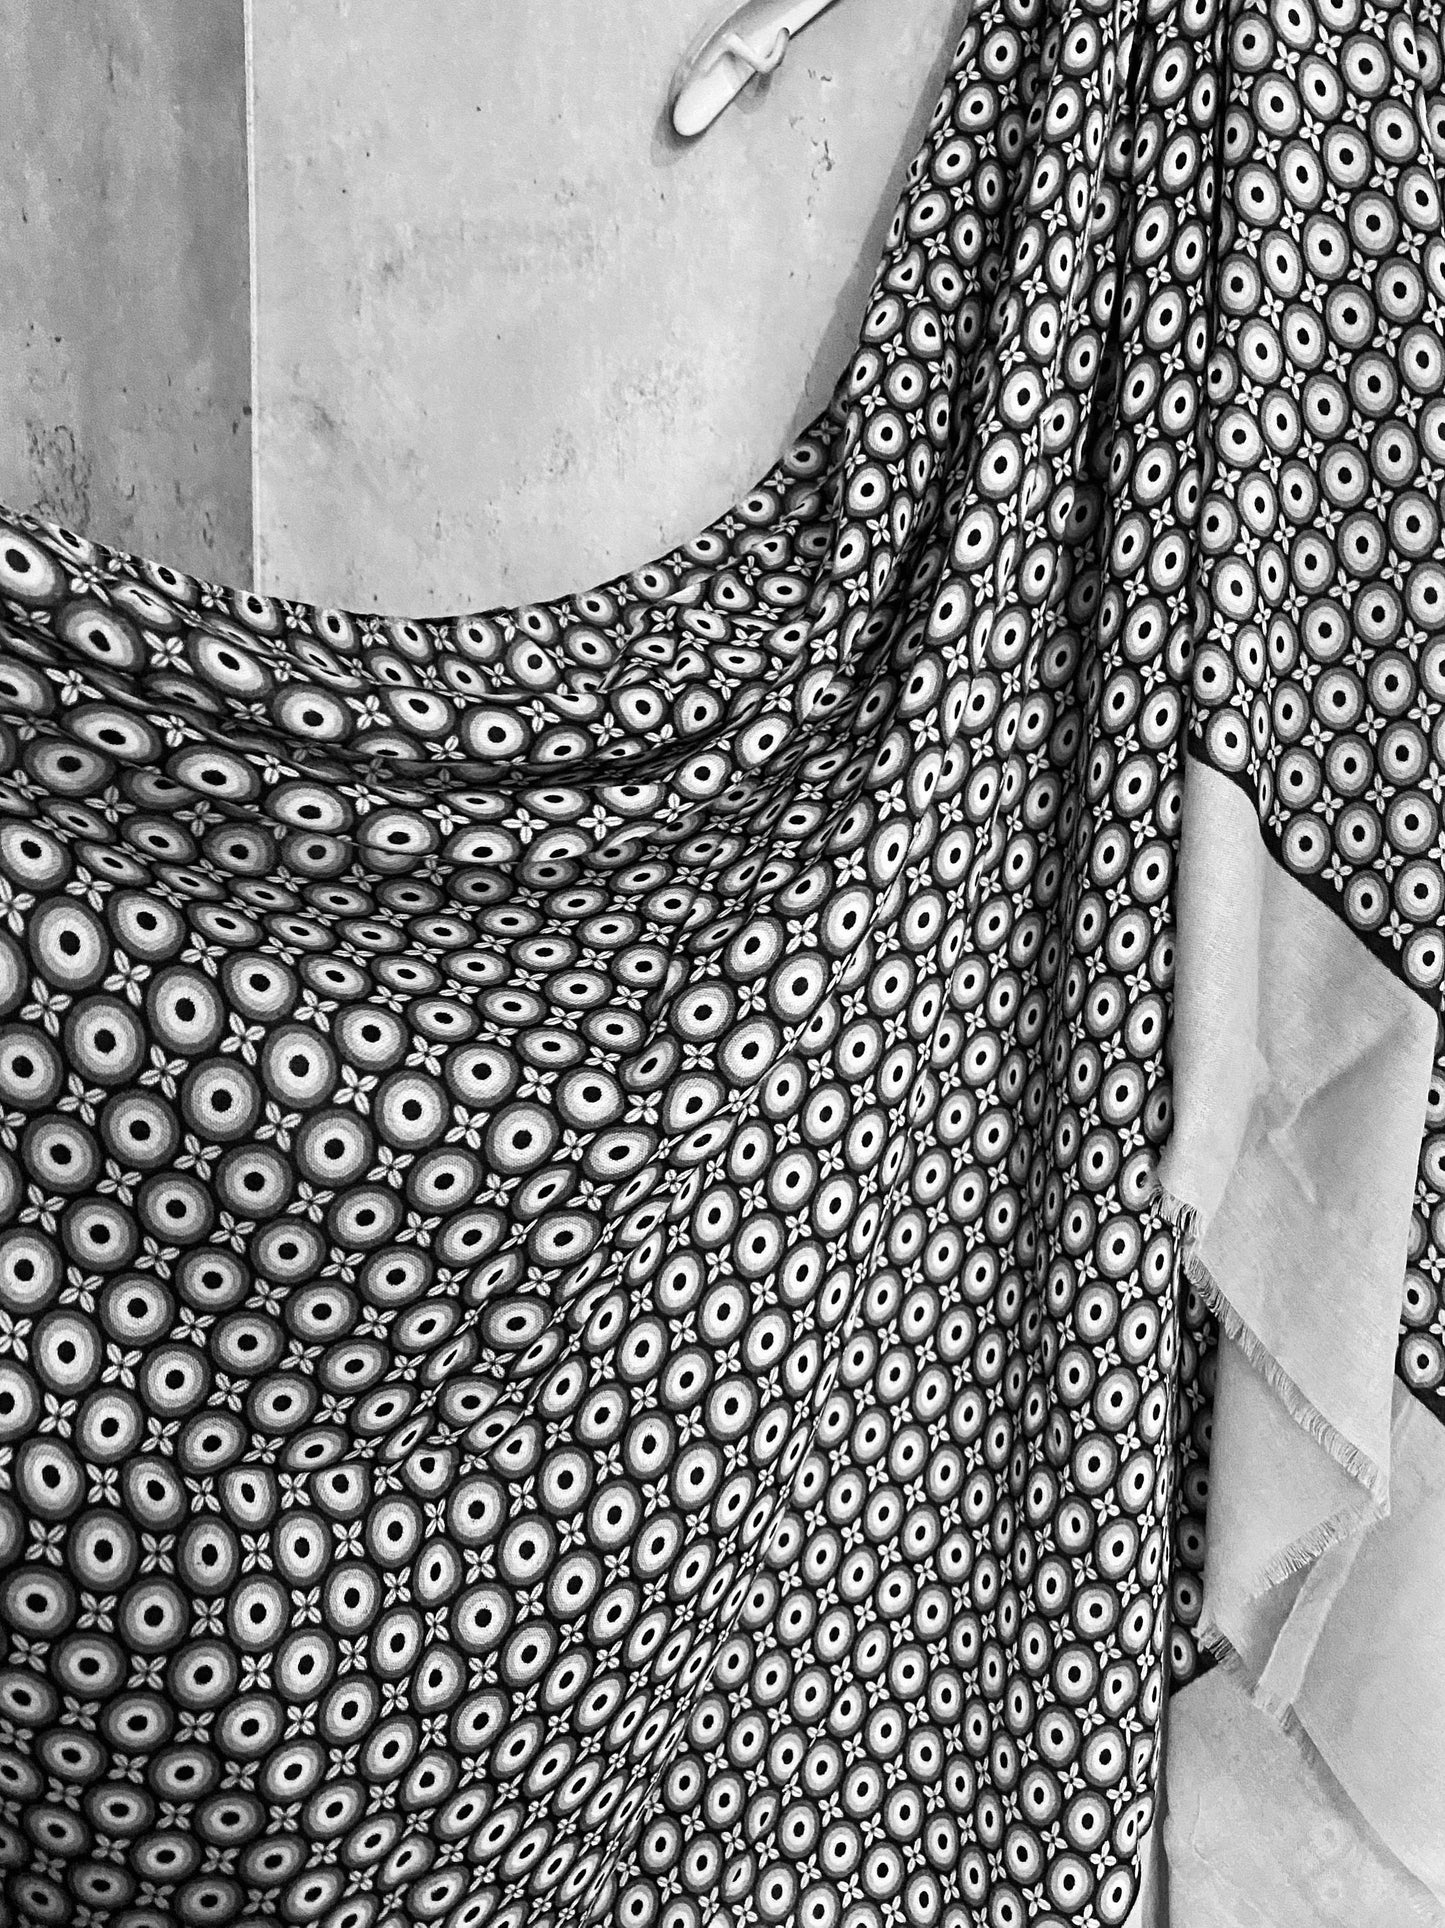 Retro Geo Seamless Dots Pattern Grey Cotton Scarf/Summer Autumn Scarf/Gifts For Mom/Scarf Women/UK Seller/Gifts For Her Birthday Christmas